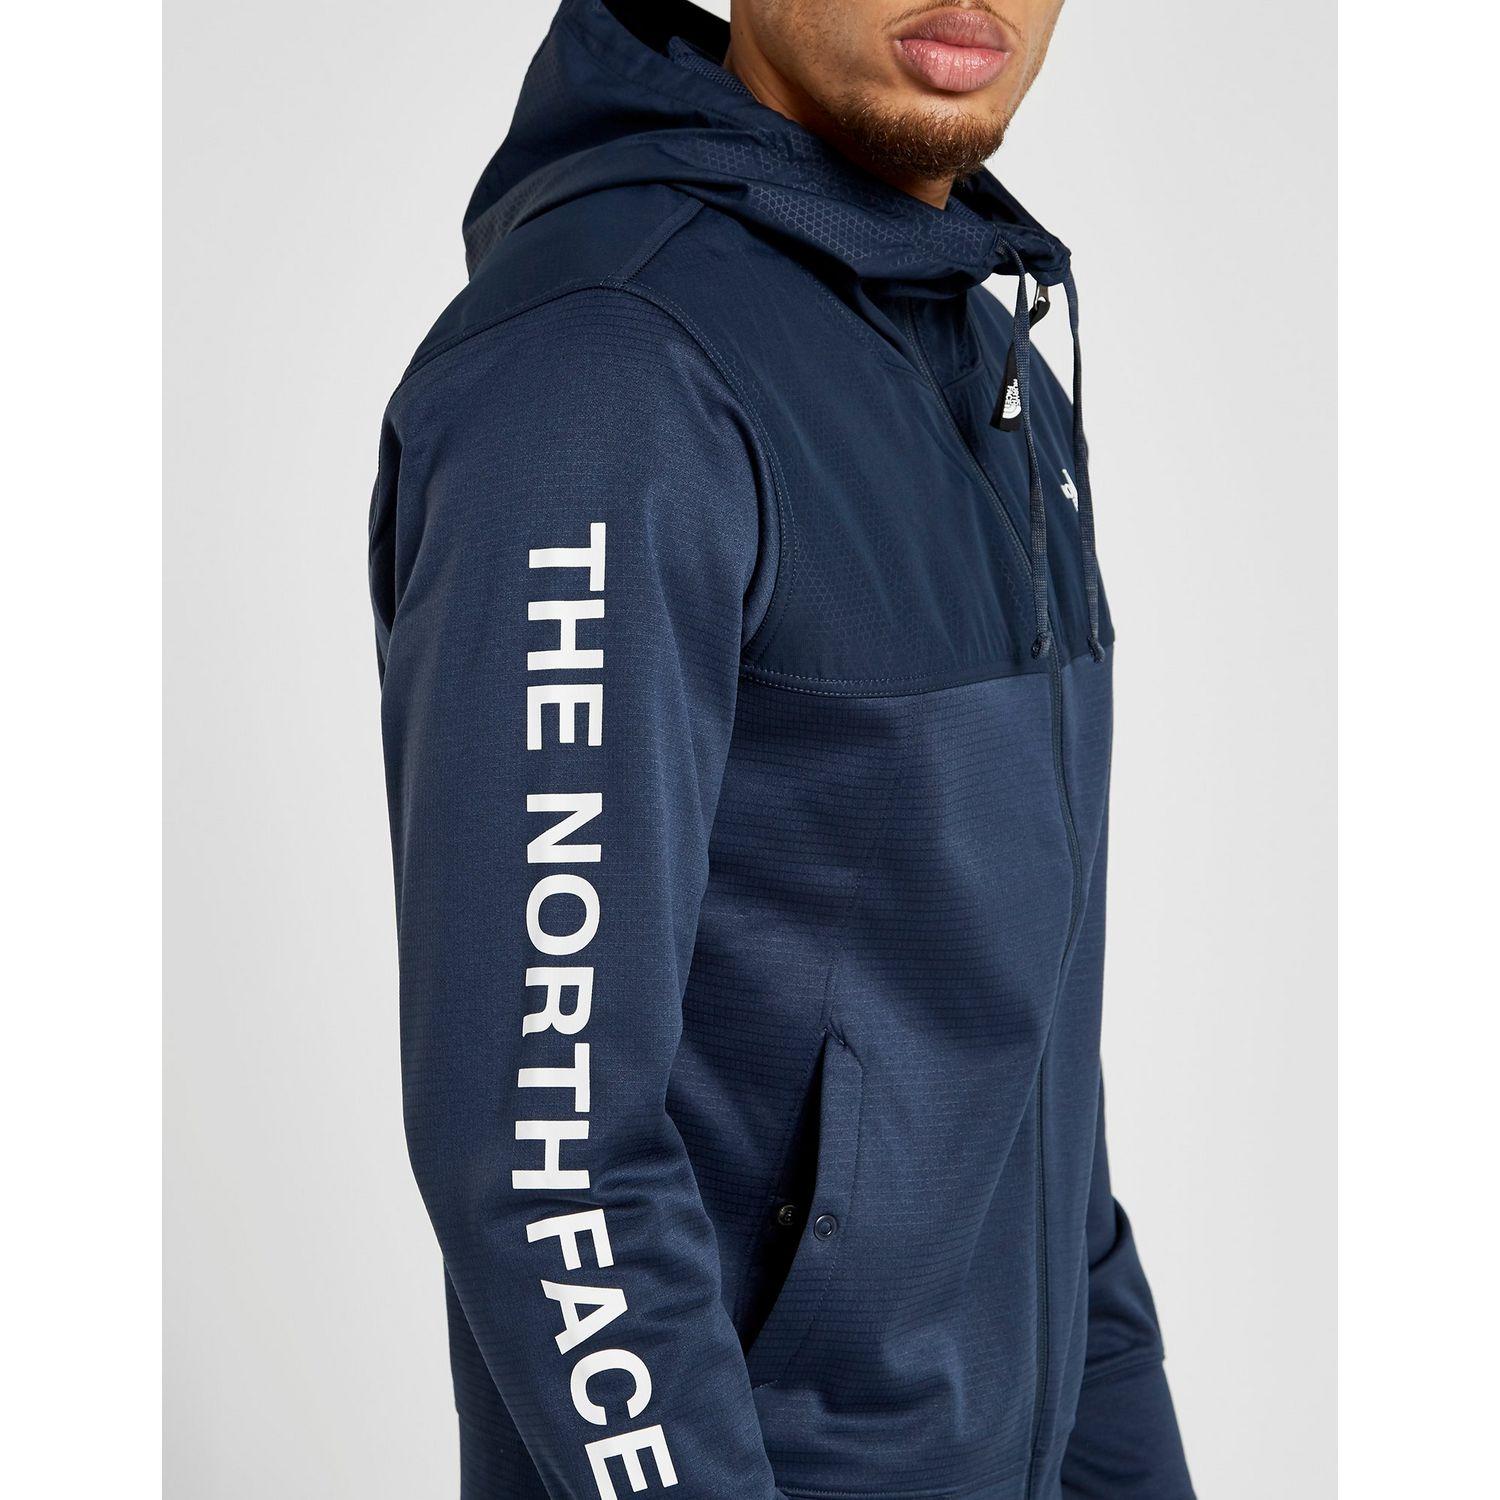 the north face train n logo overlay Shop Clothing & Shoes Online